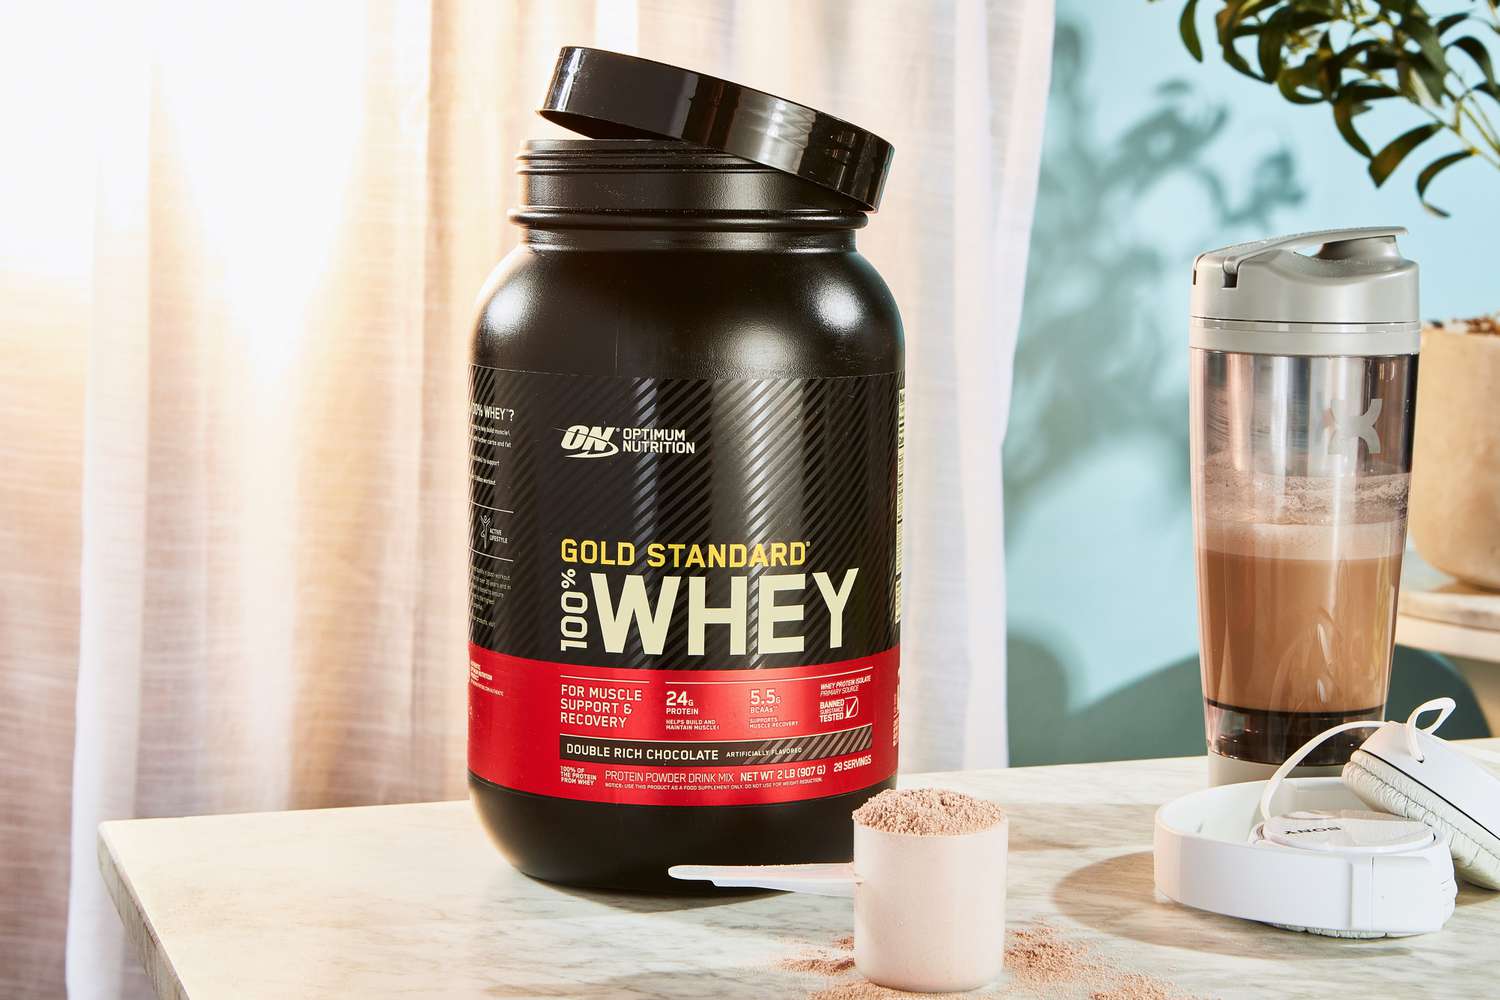 Optimum Nutrition Gold Standard 100% Whey Protein Powder in a scoop next to the jar and blender bottle